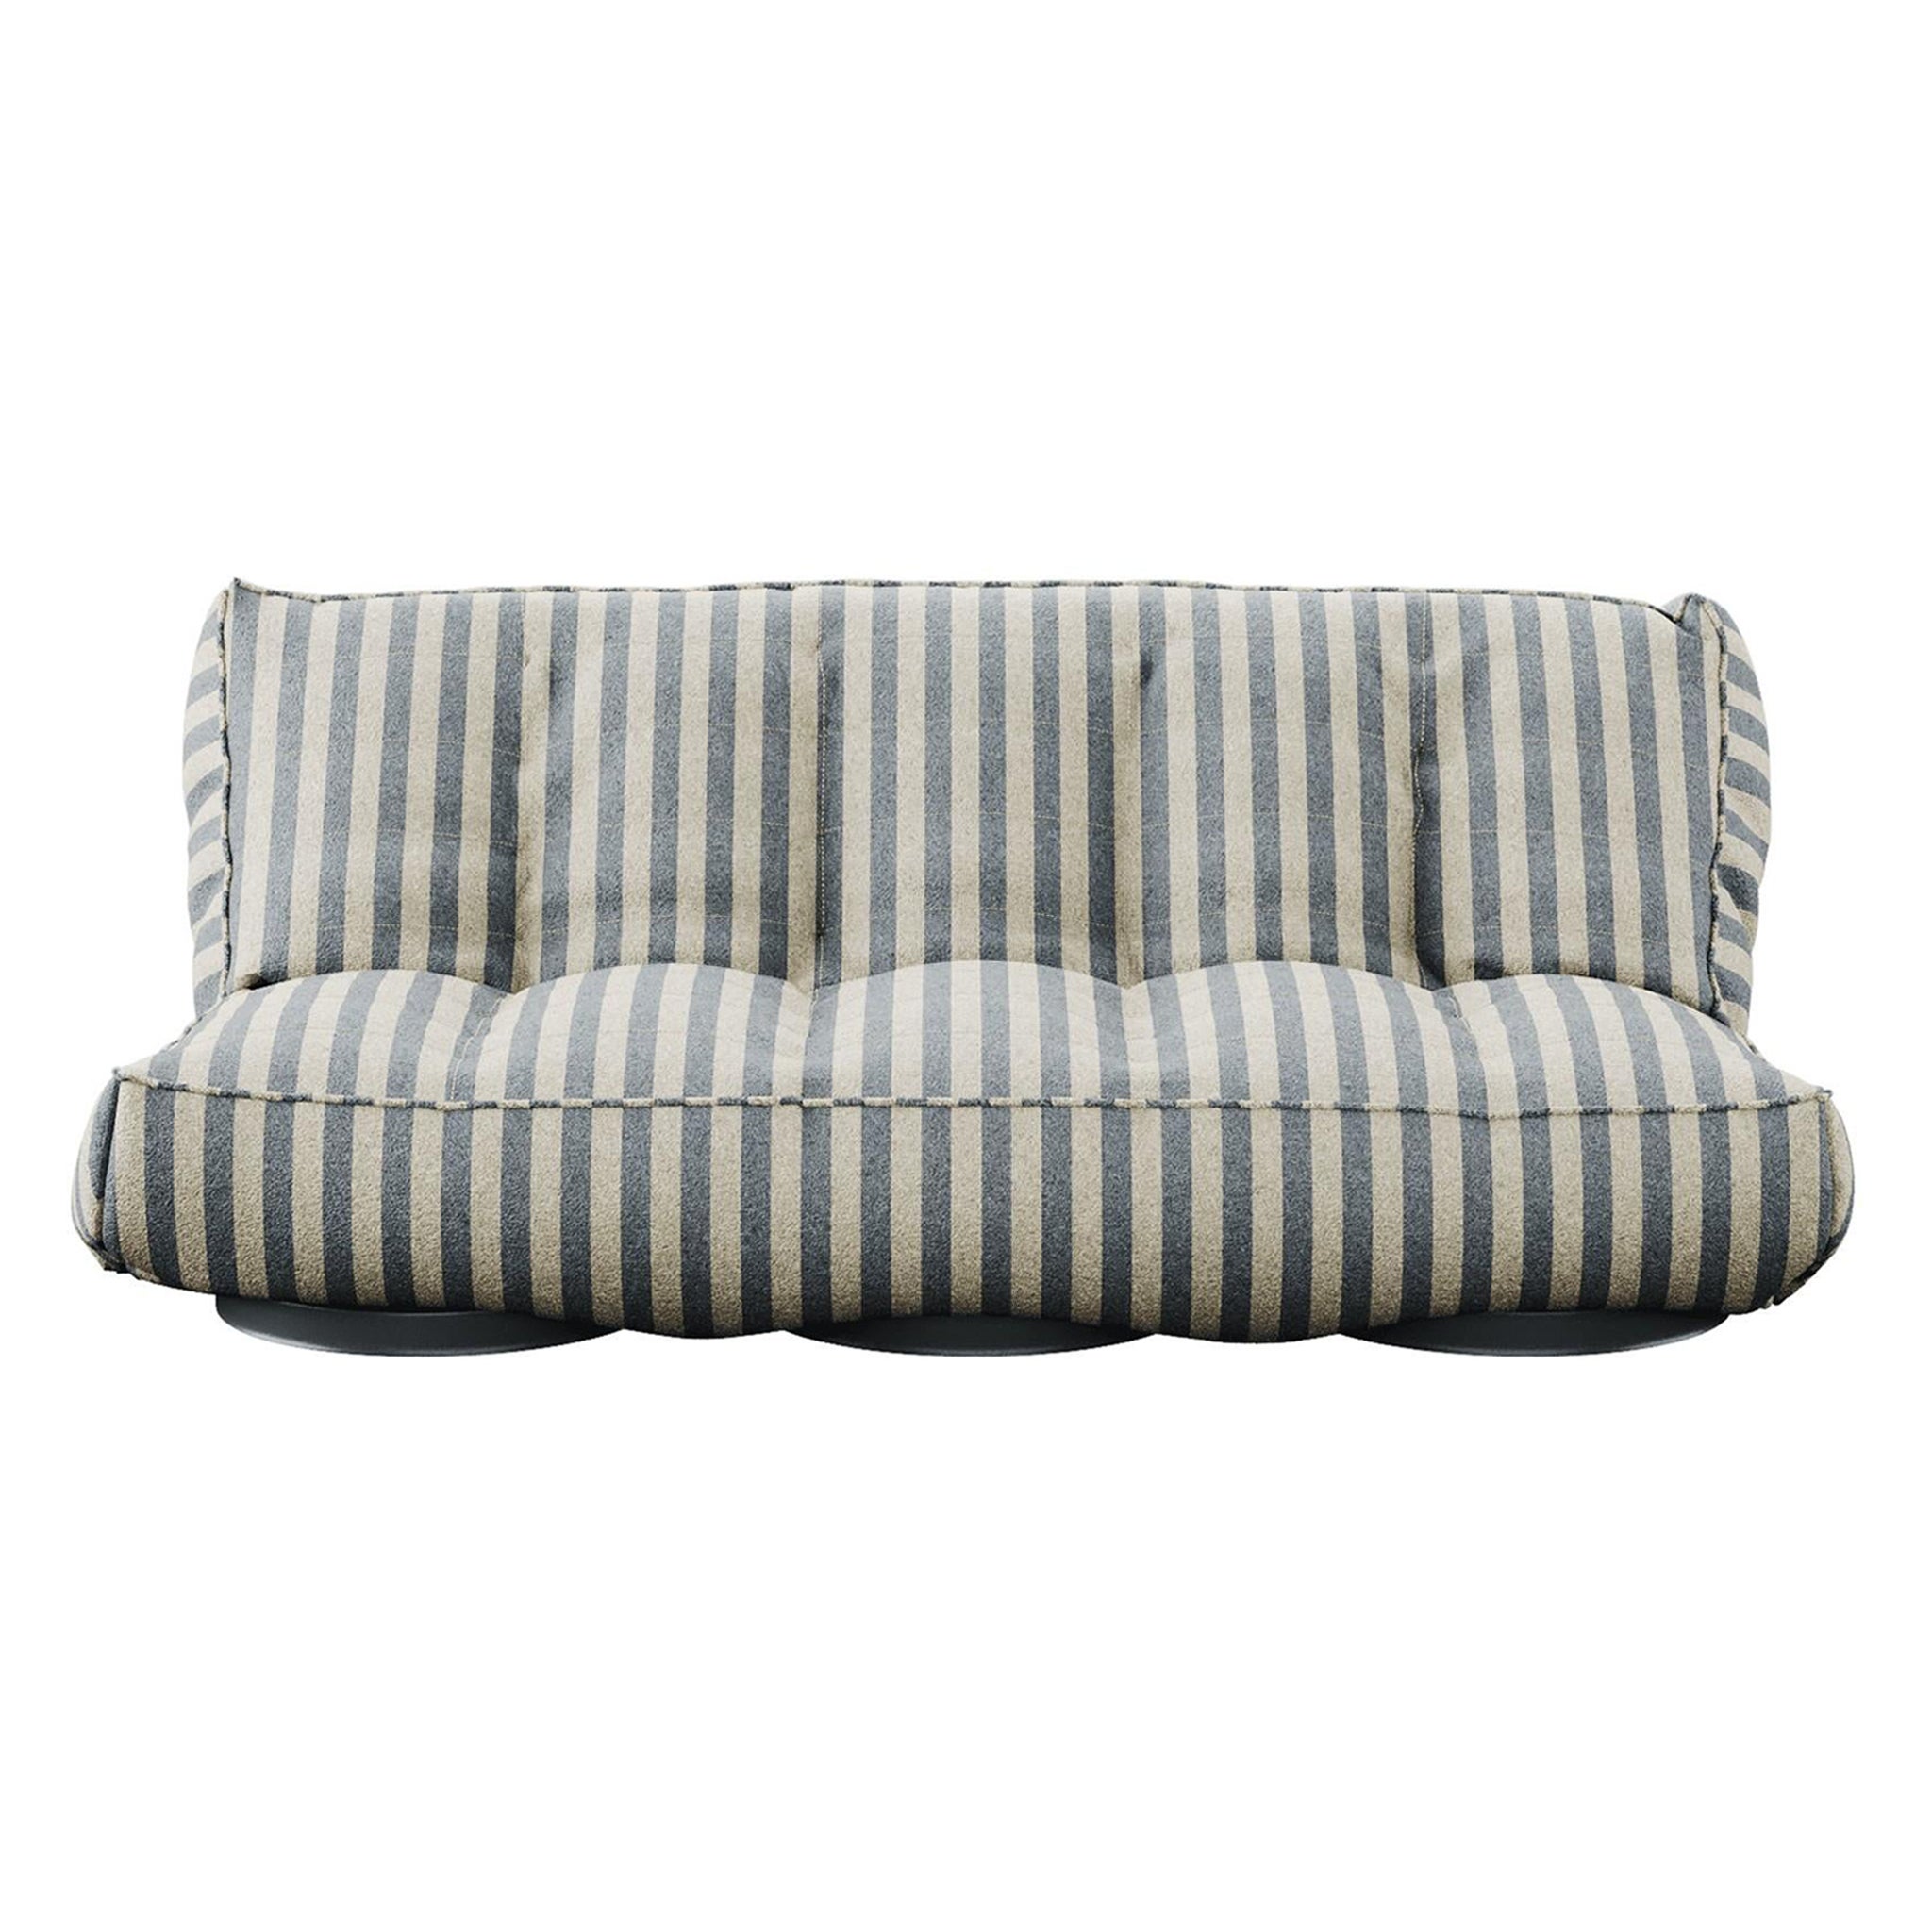 Modern Outdoor Sofa Folding Daybed Upholstered in Outdoor Blue Striped Fabric